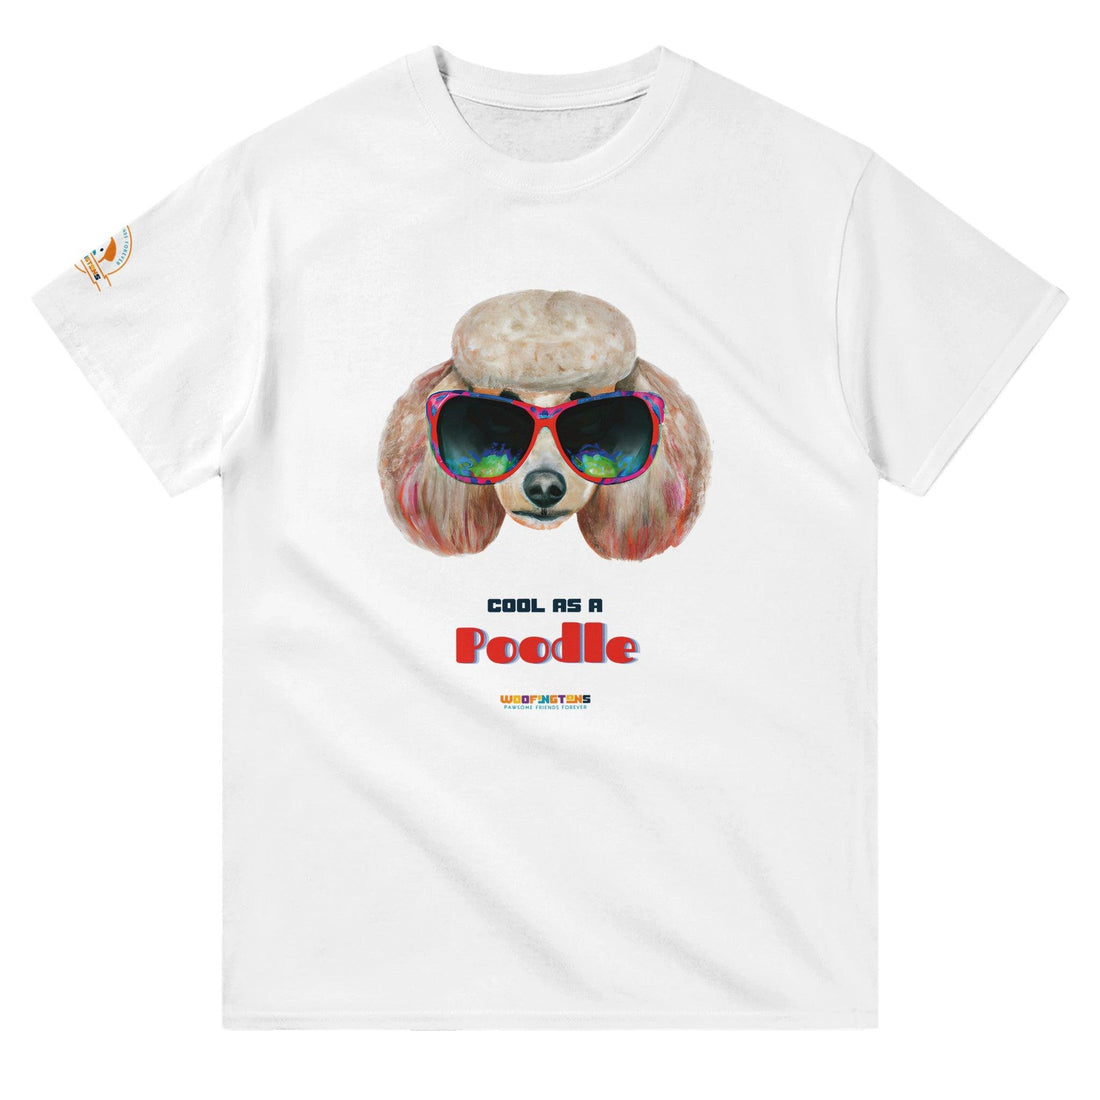 &quot;Cool as a Poodle” - Cool Dog T-Shirt - Woofingtons